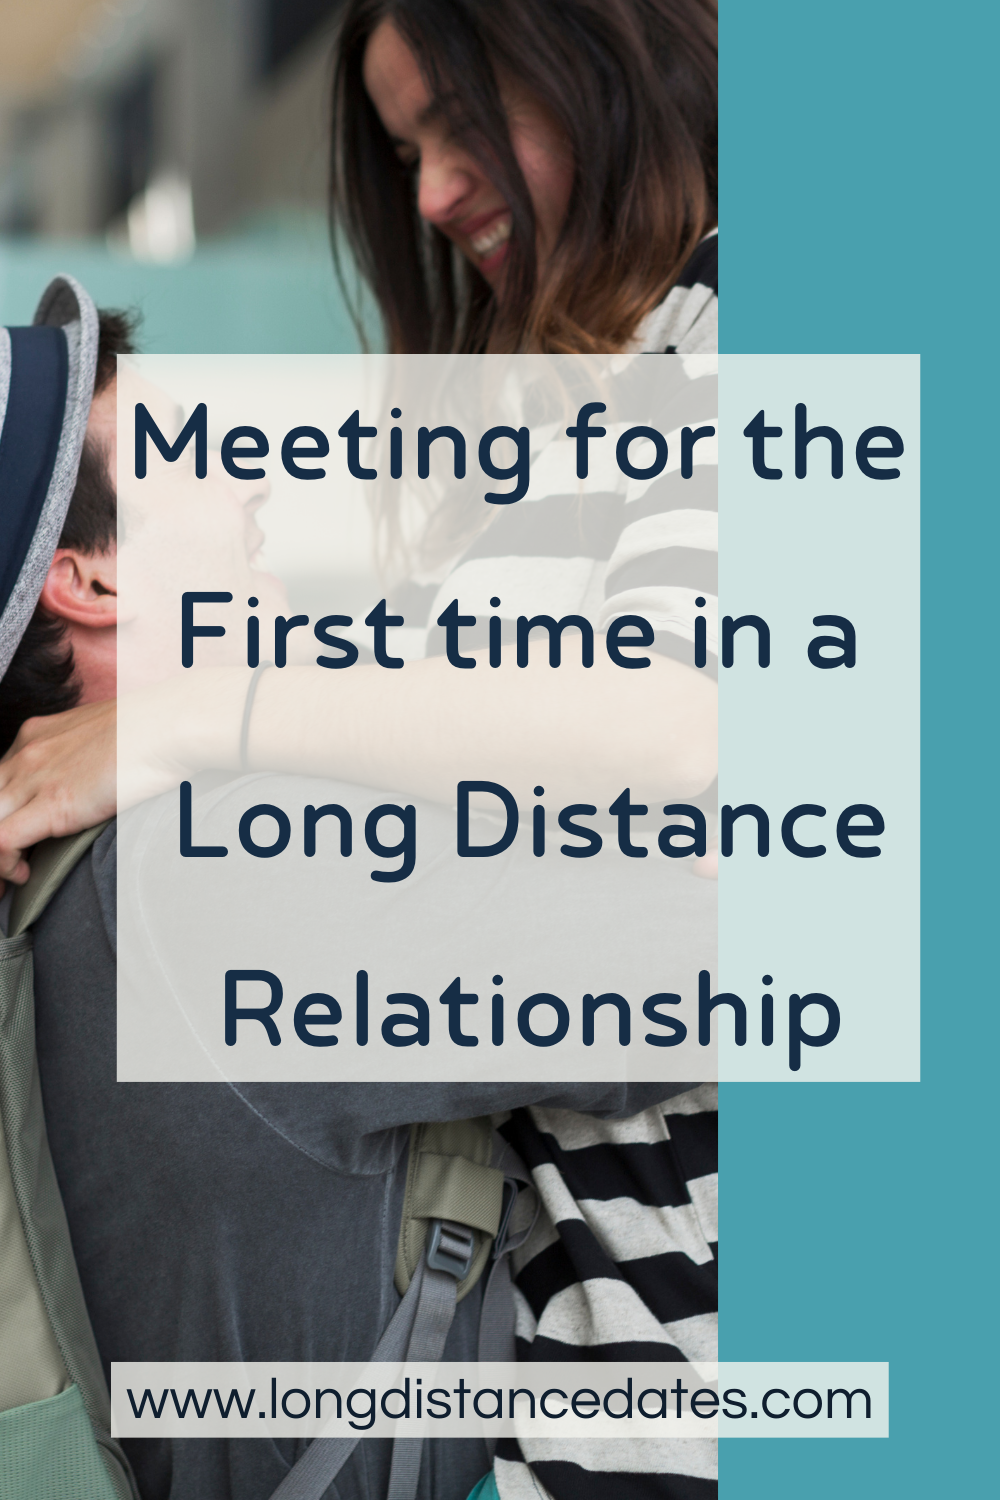 Meeting For The First Time In a Long Distance Relationship